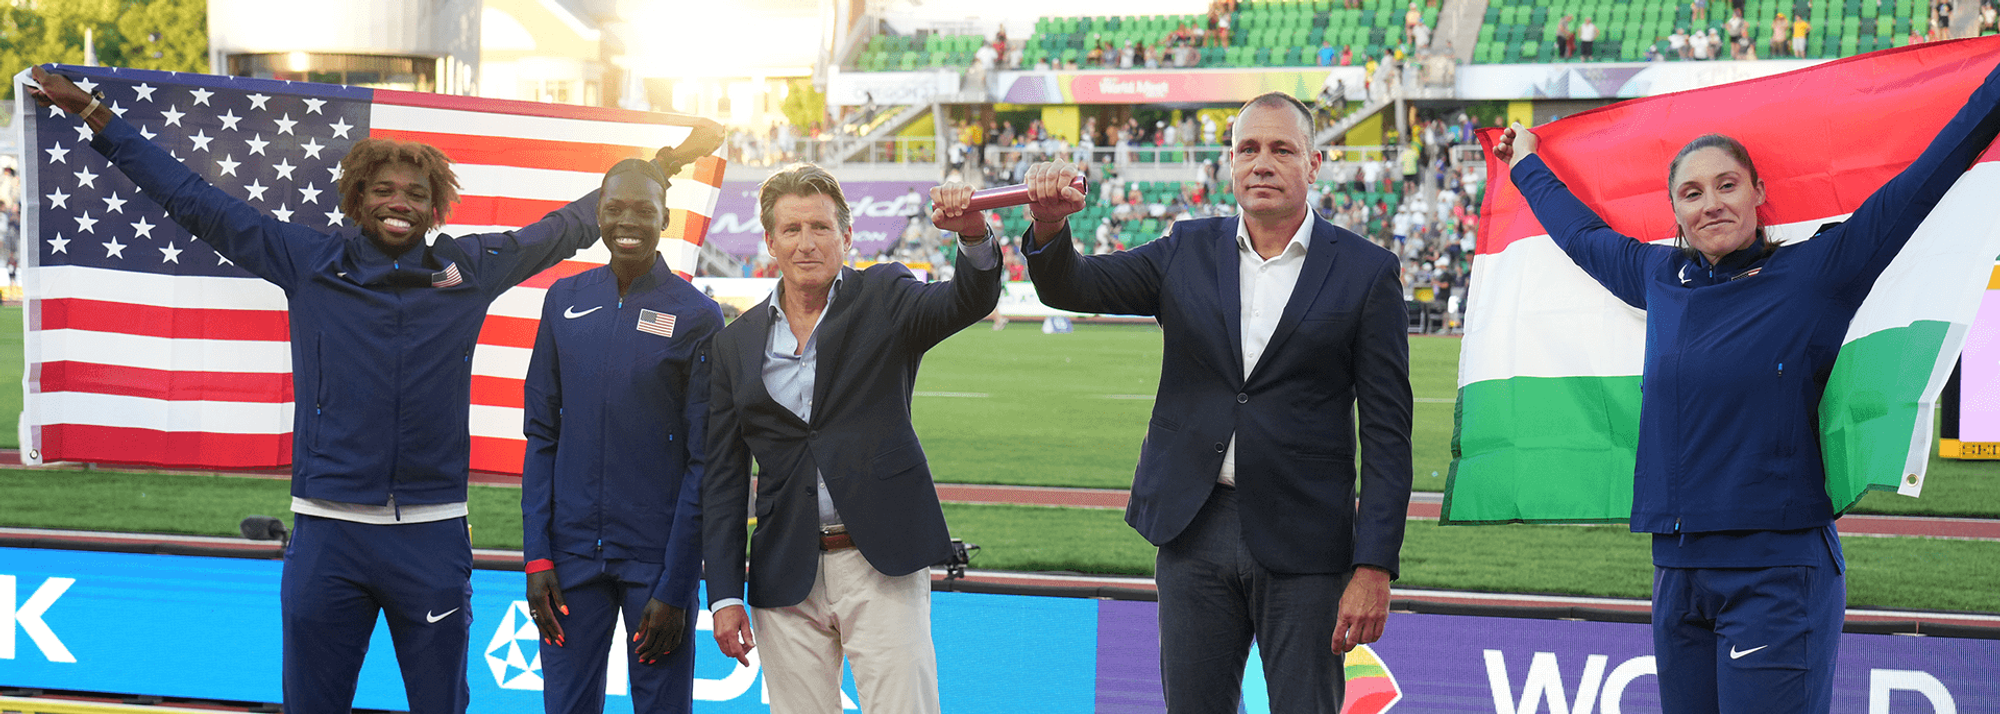 Stars of Team USA and Sebastian Coe, President of World Athletics, handed over the baton to Miklós Gyulai, President of the Hungarian Athletics Federation, and drew the attention of the whole world to the fact that Hungary will host the next World Athletics Championships after the World Champs in Oregon.